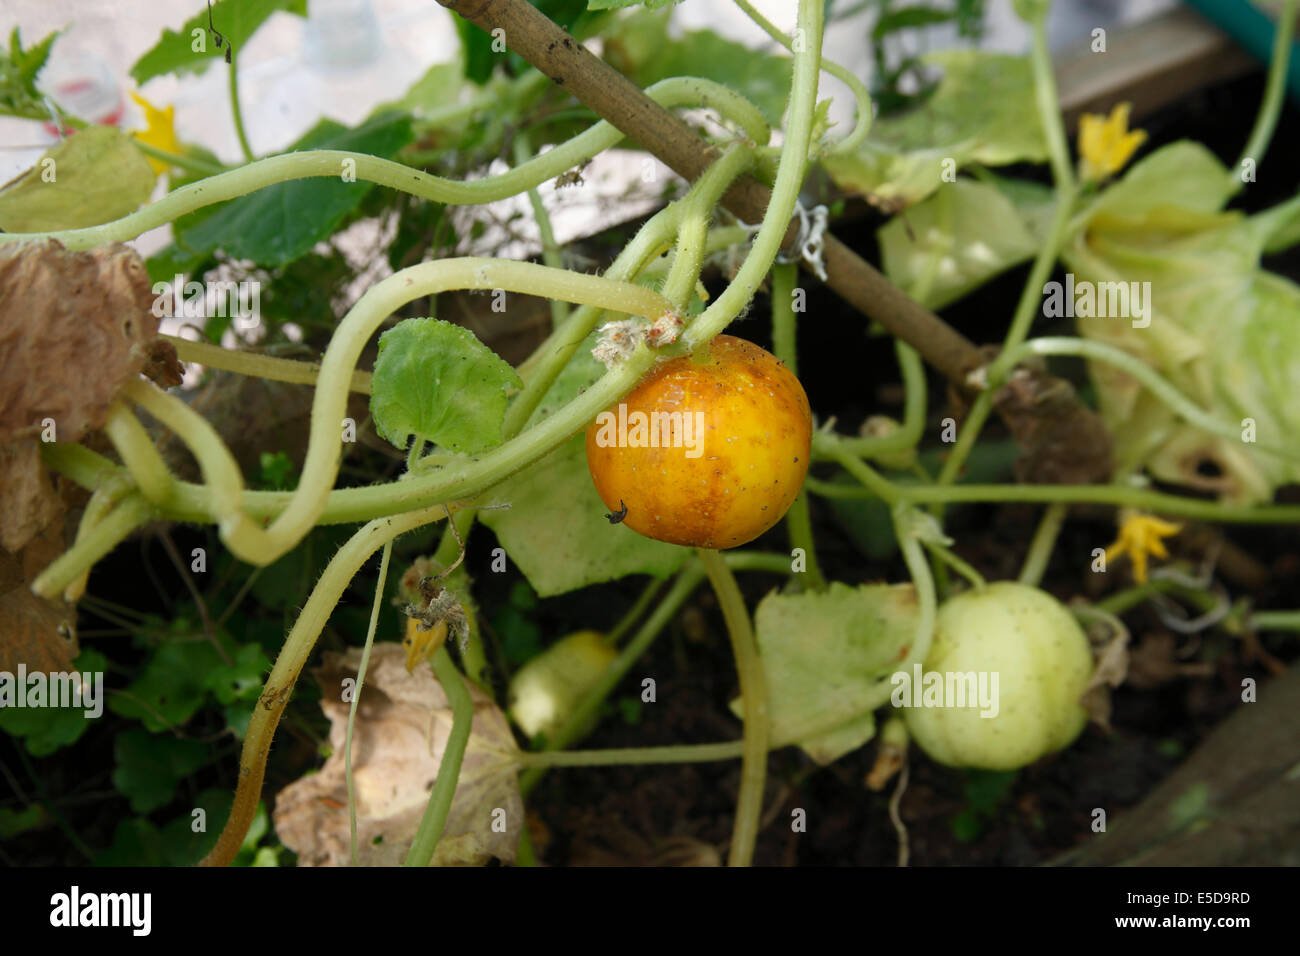 Cucumis sativus 'Crystal apple' cucumber close up of fruit growing in greenhouse Stock Photo